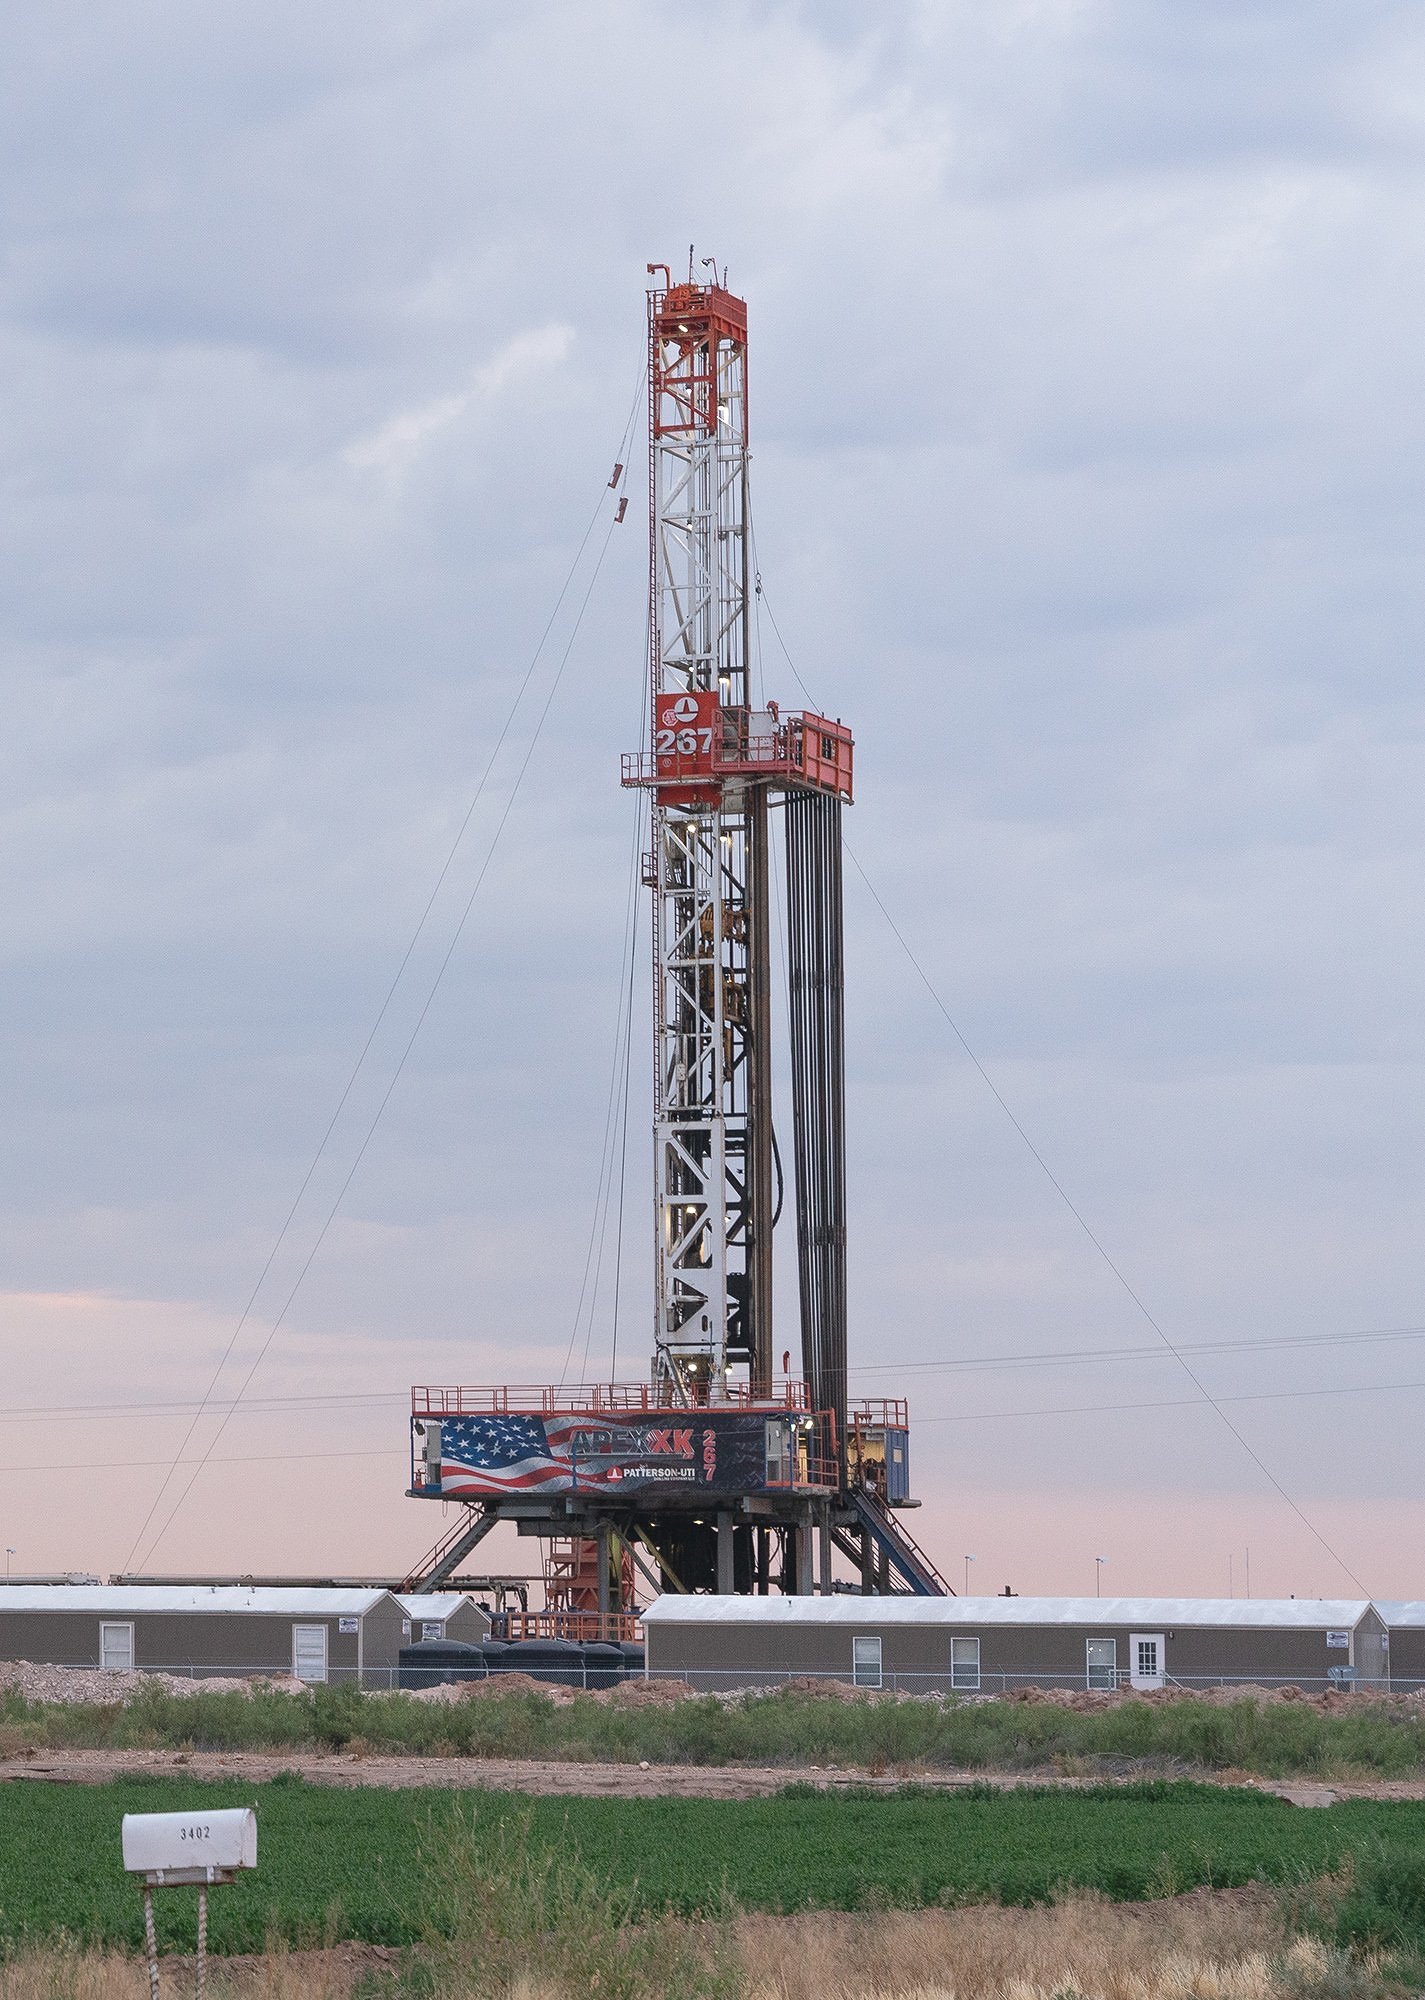 Drilling rig near Carlsbad, NM photographed for the Center for Biological Diversity